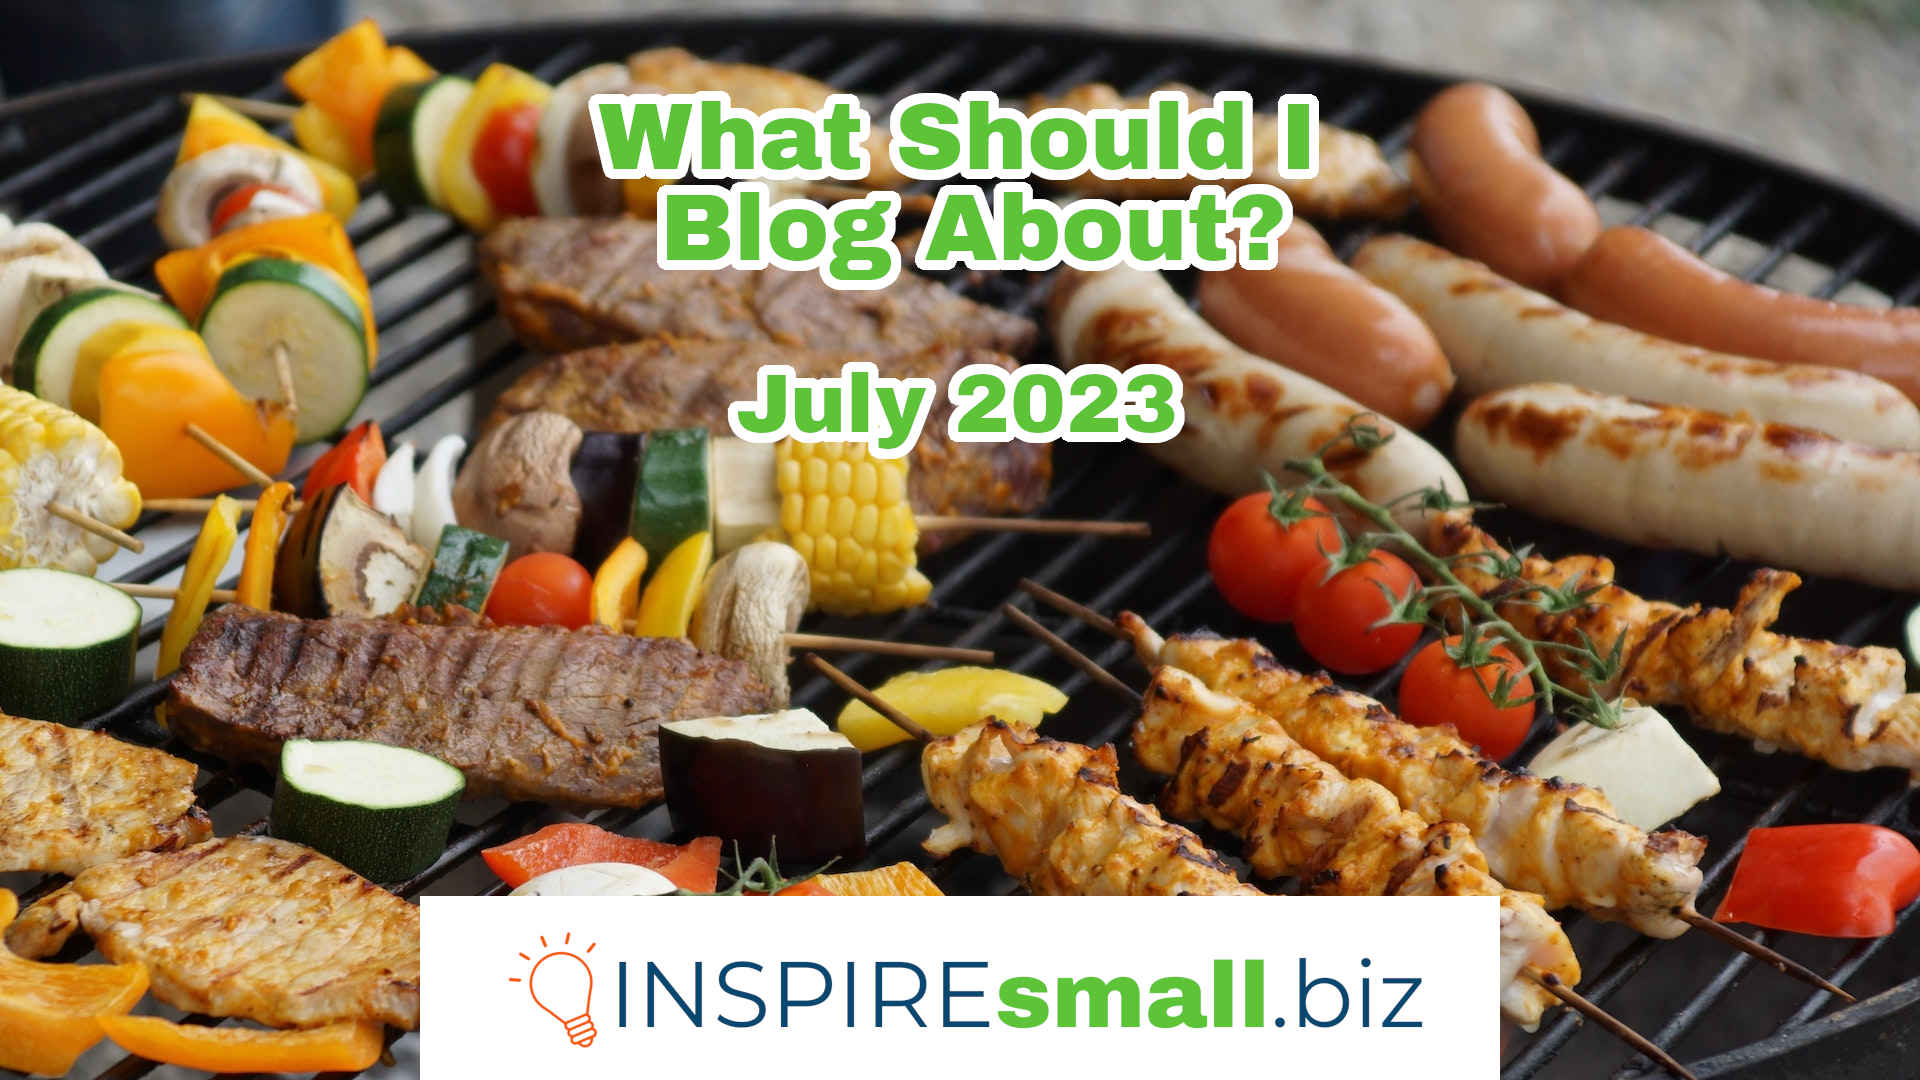 What Should I Blog About in July 2023? Don't forget to celebrate National Grilling Month and read on to find more ideas! By INSPIREsmall.biz